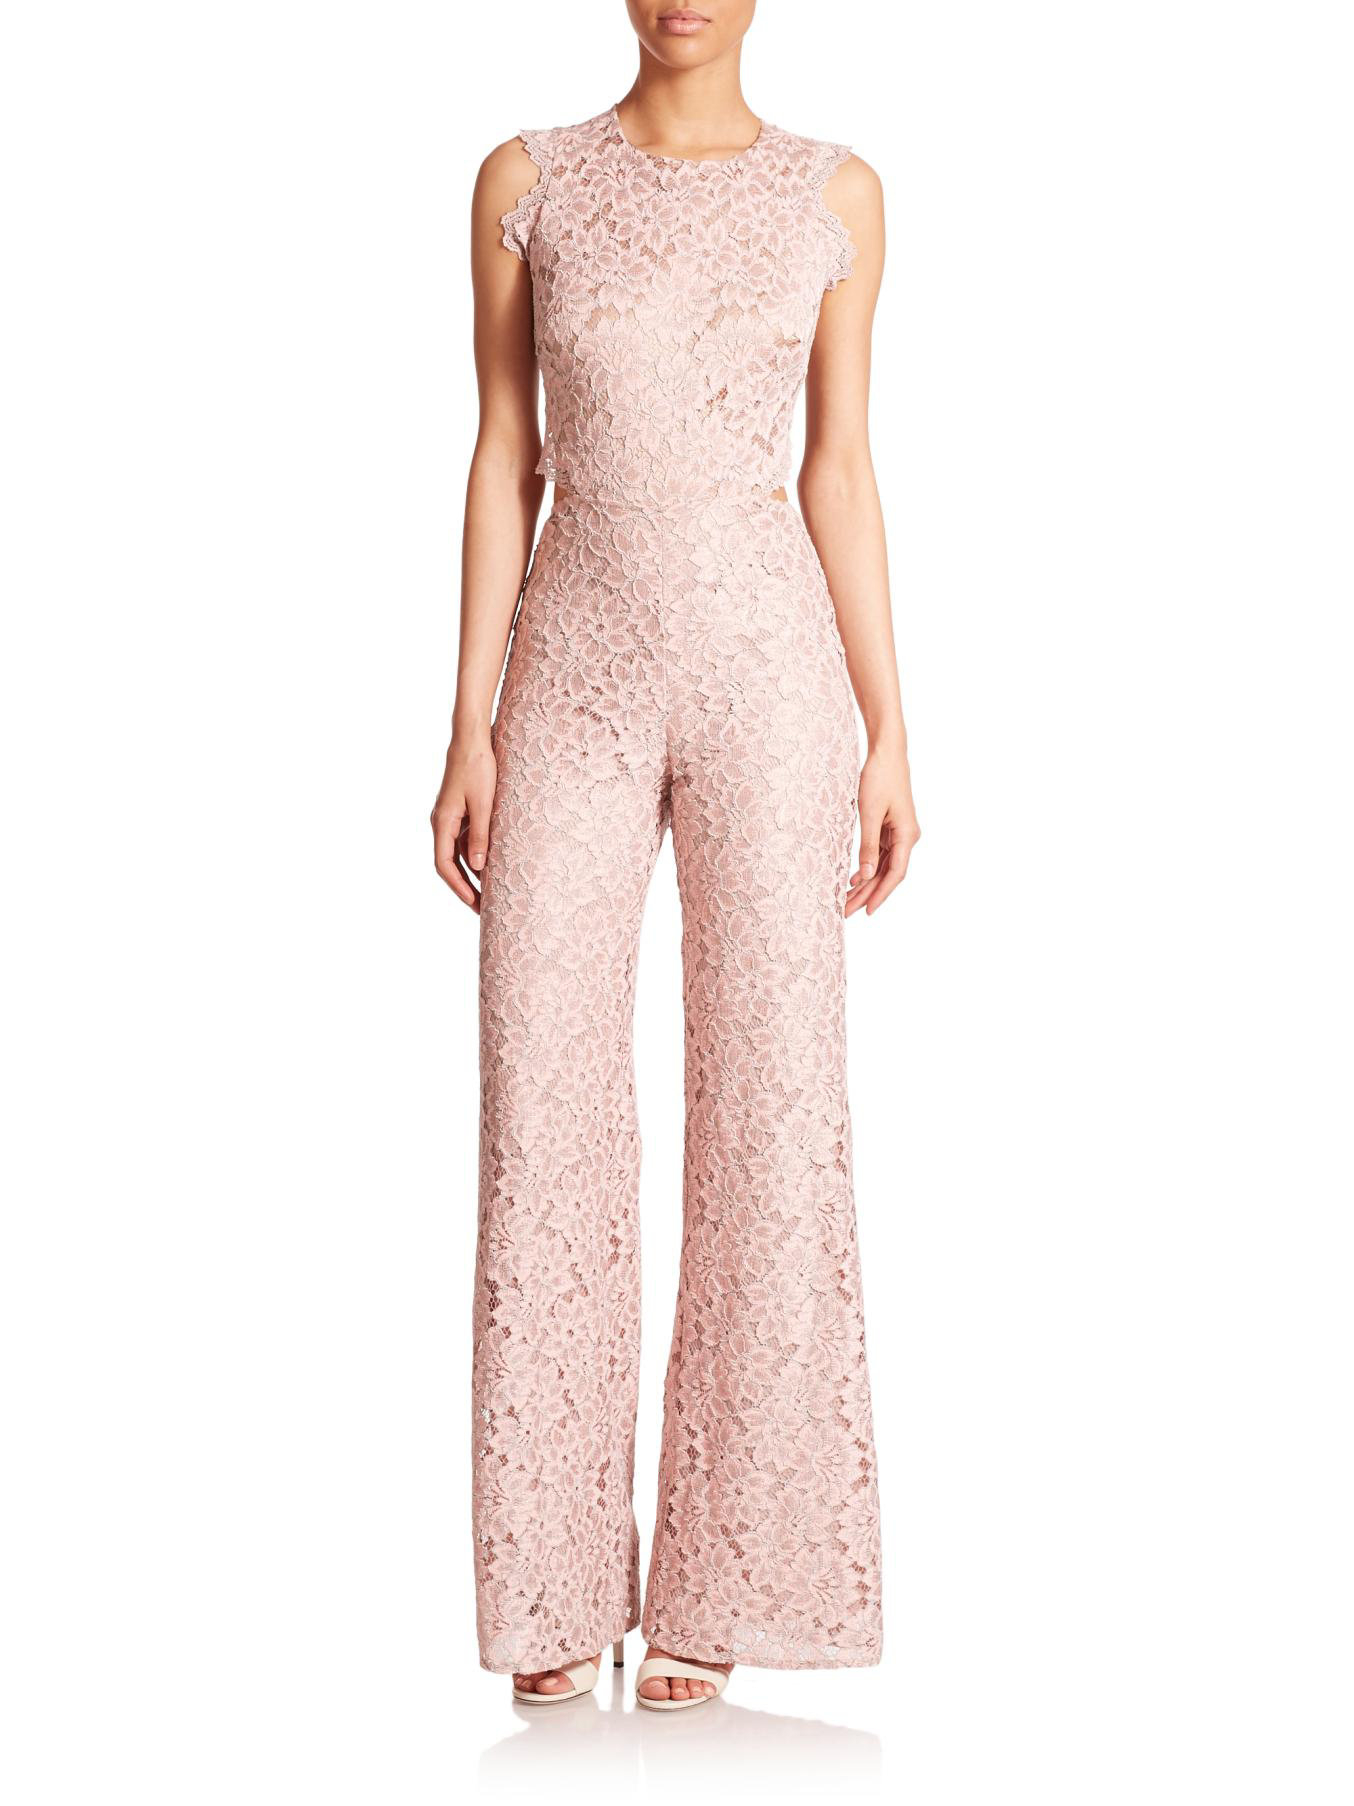 Alexis Livia Floral Lace Cutout Jumpsuit in Pink | Lyst